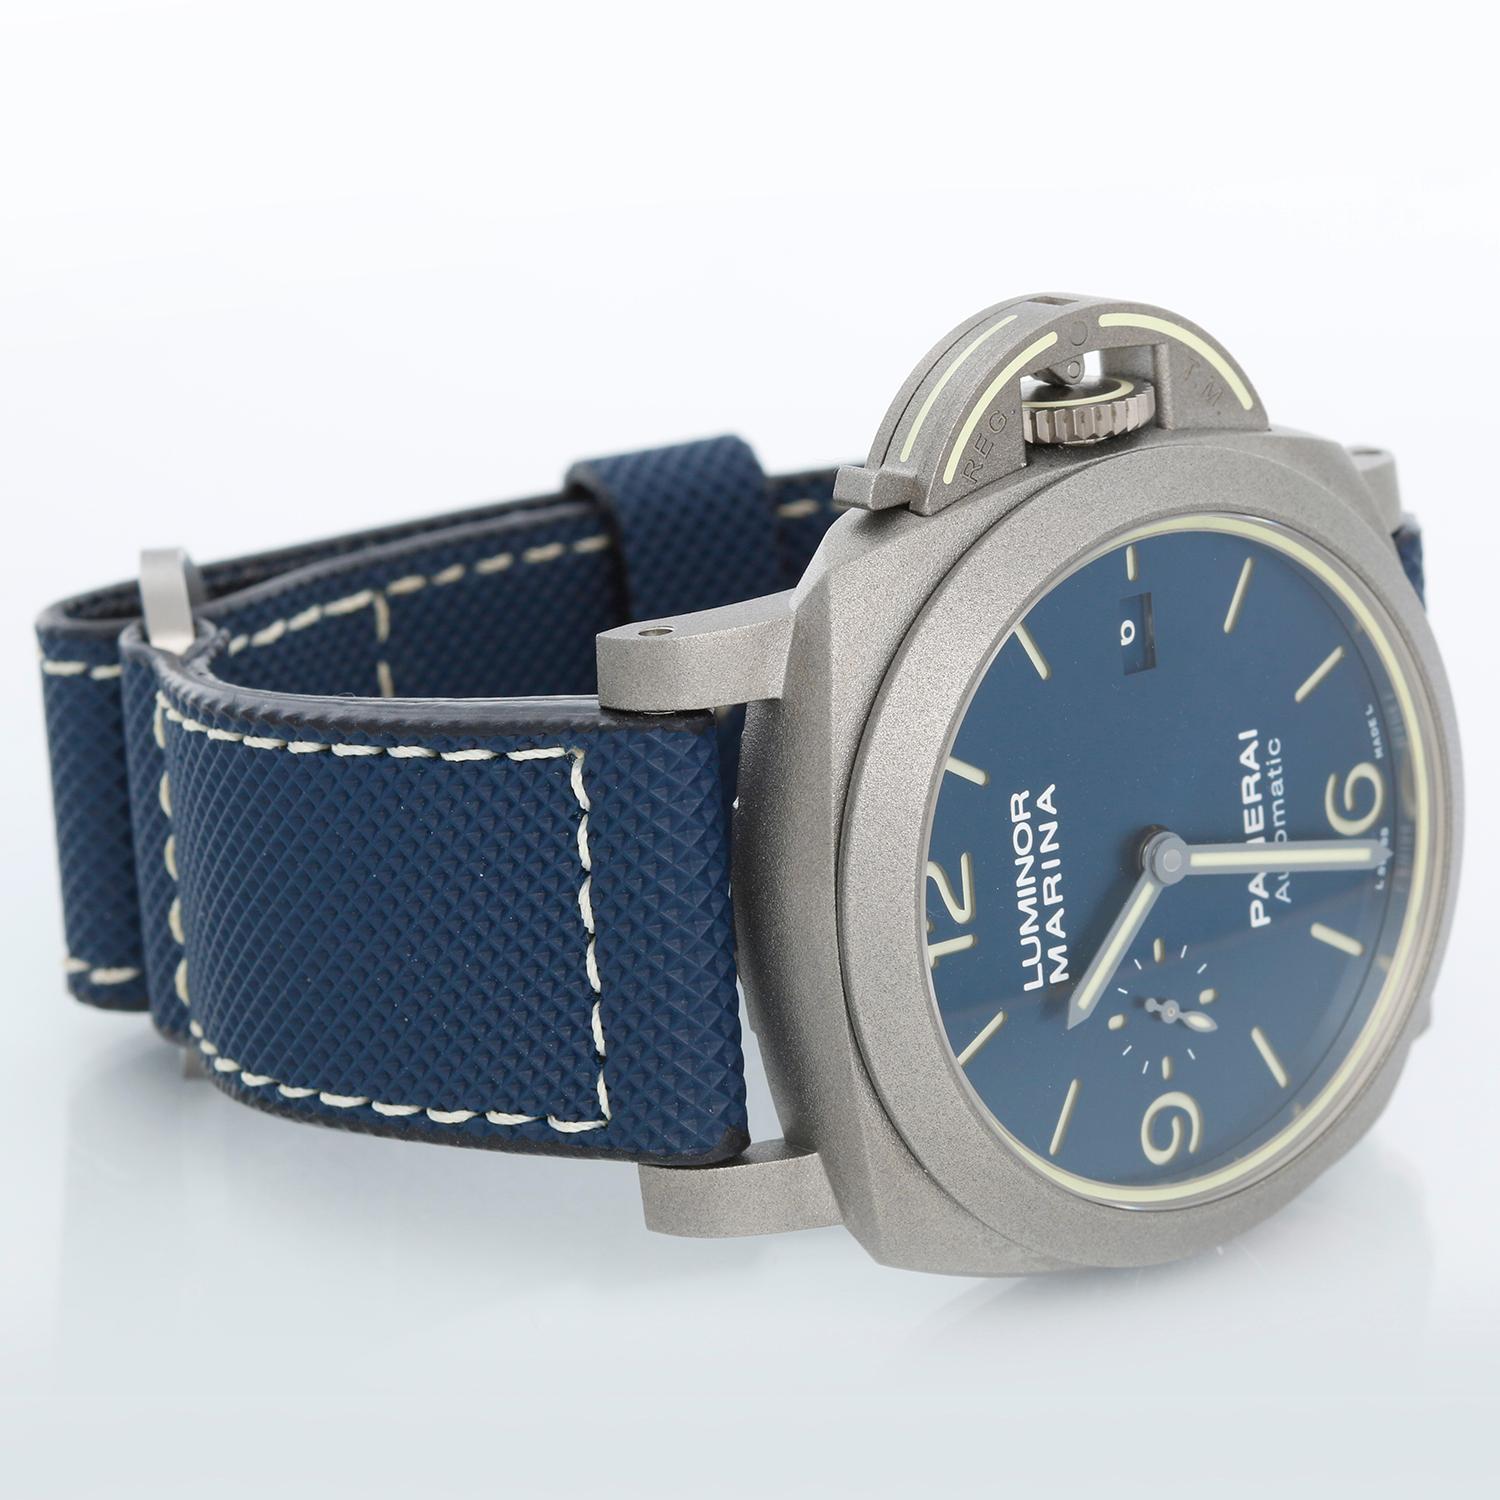 Panerai Luminor Marina 44mm PAM 0117 (70 YEAR WARRANTY) - Automatic winding. Titanium watch with smooth bezel ( 44 mm ). Luminous crown guard. Blue sun-brushed with luminous Arabic numerals and hour markers. Date at 3 o'clock and small seconds at 9